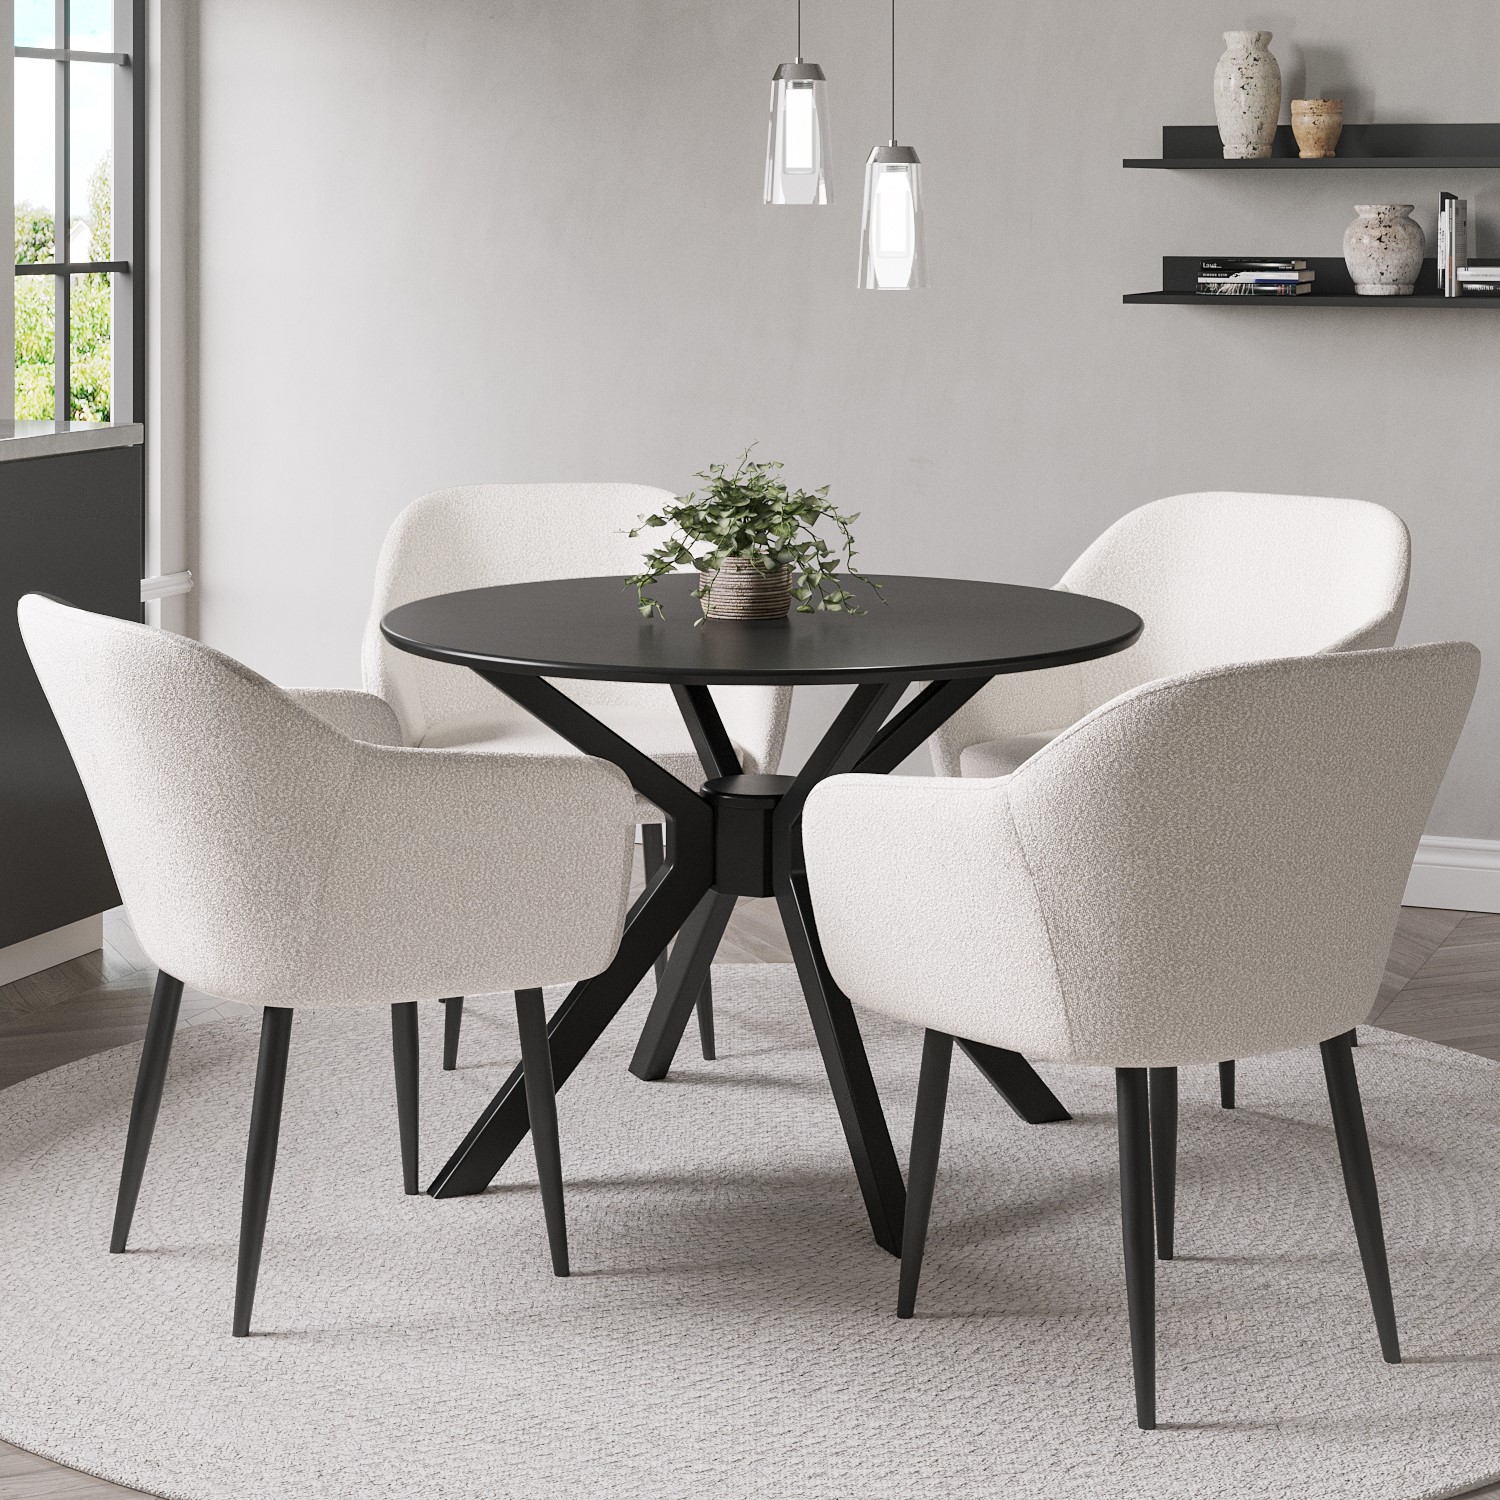 Round Black Dining Table Seats 4, Black Kitchen Table And 4 Chairs